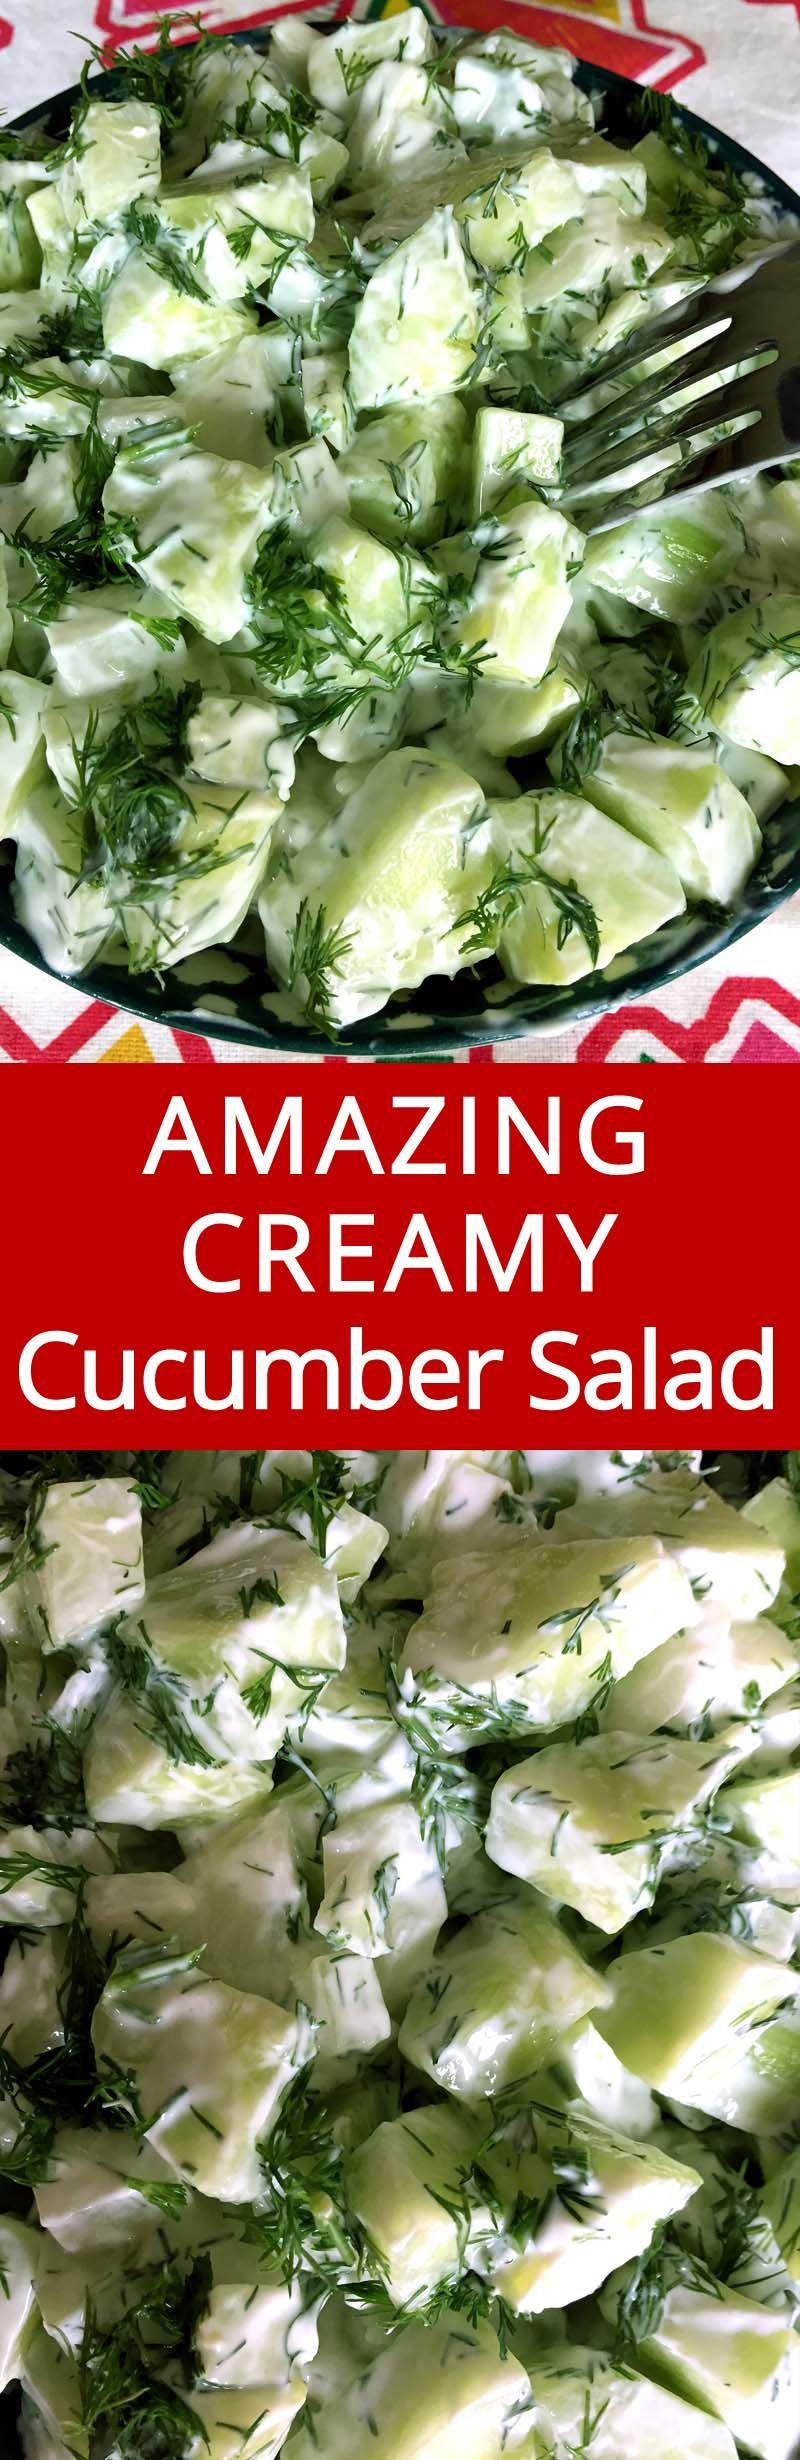 This creamy cucumber dill salad is always a hit! Perfect for potlucks, I love this recipe!